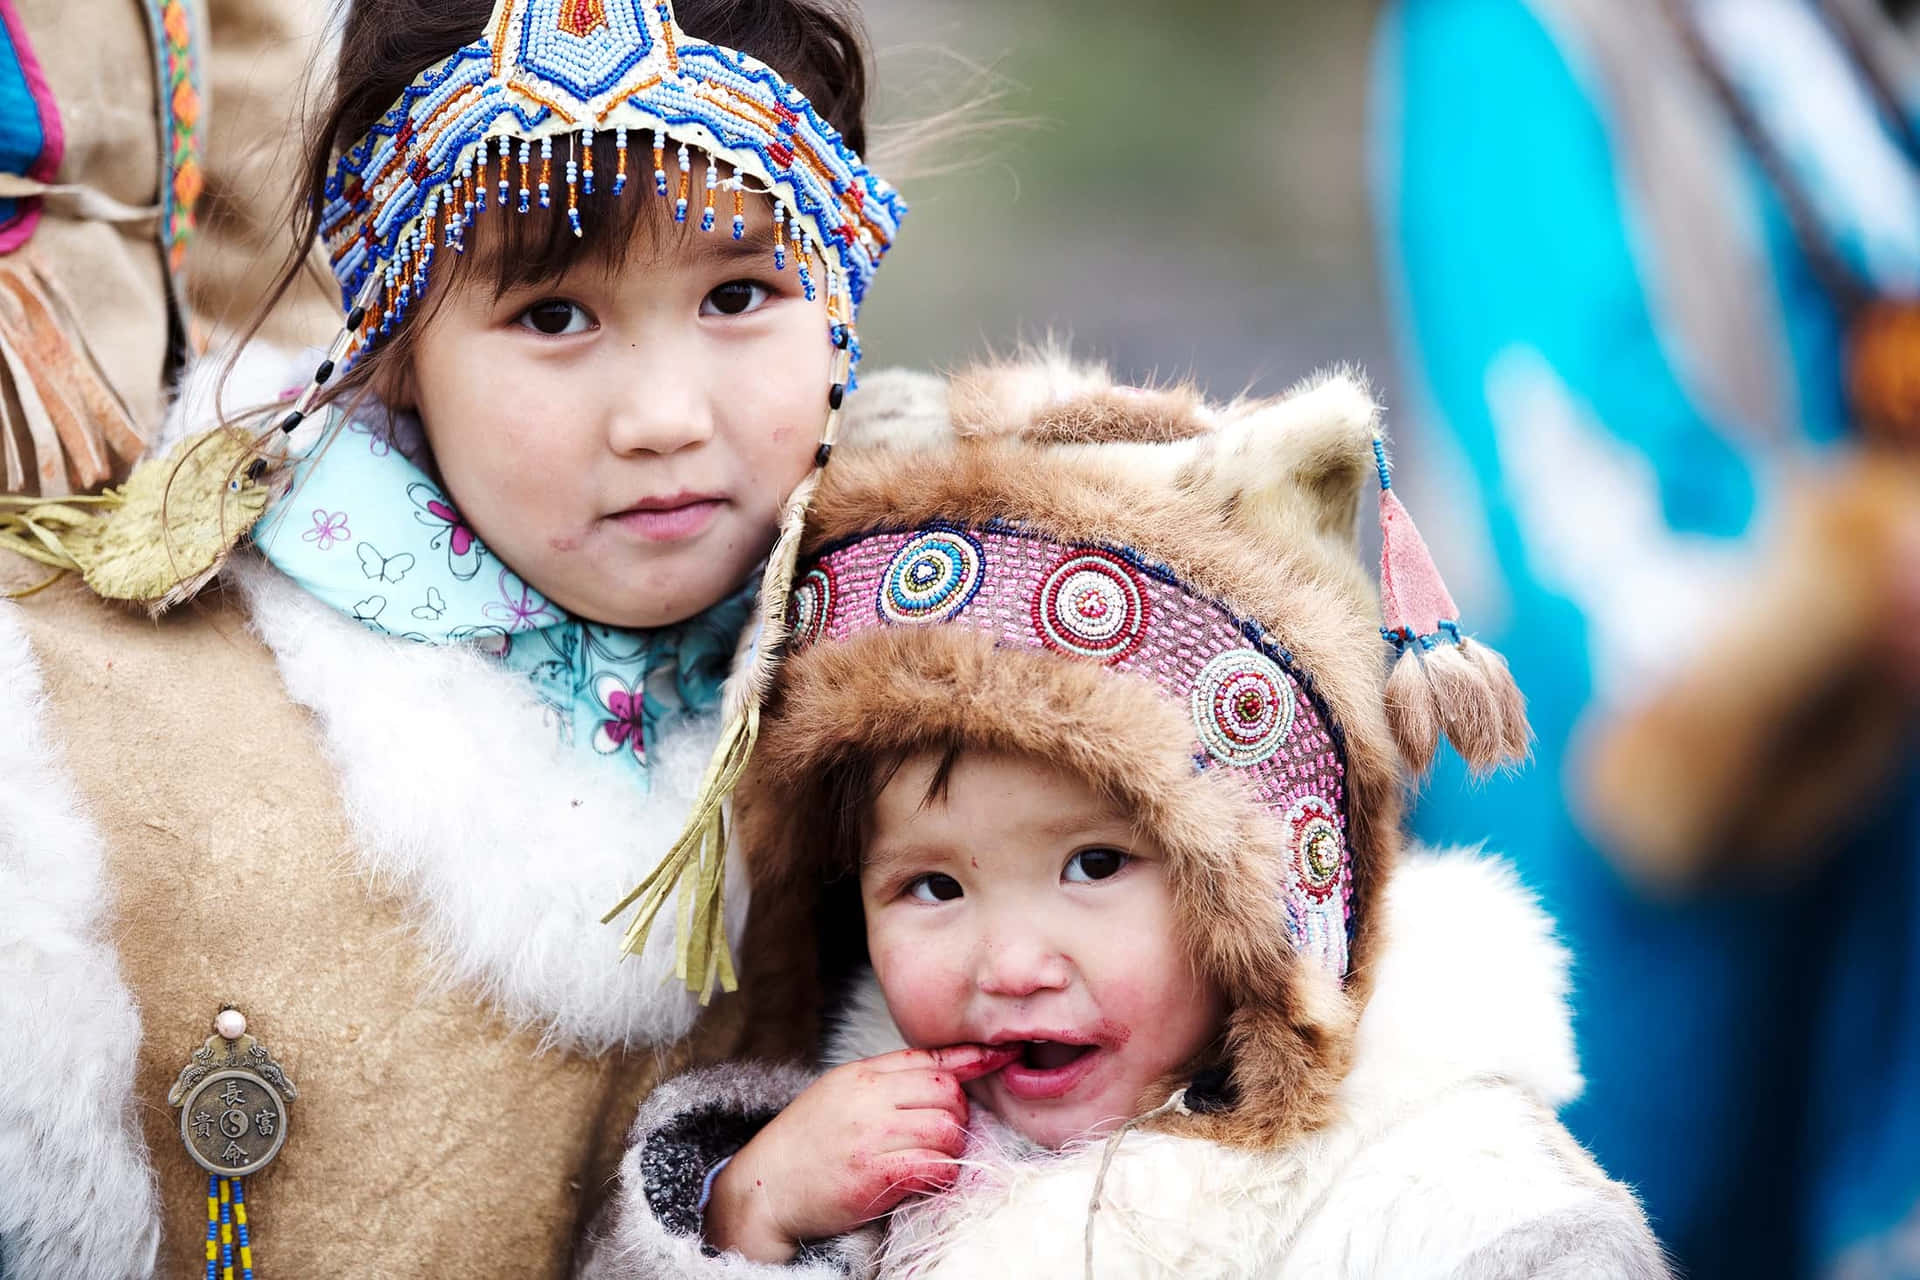 Two Children In Traditional Clothing Are Posing For A Photo